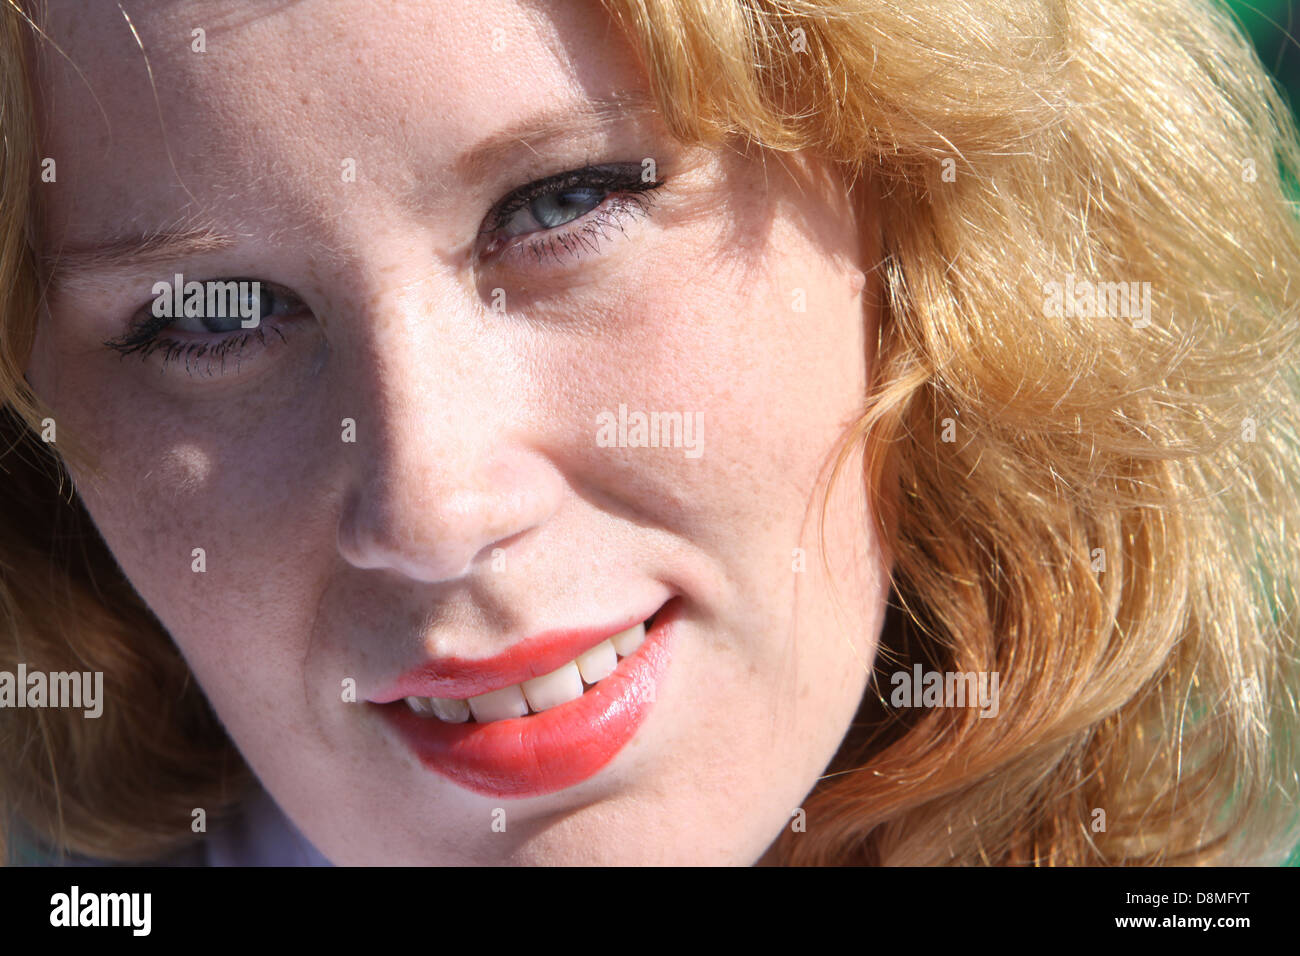 young redheaded woman Stock Photo